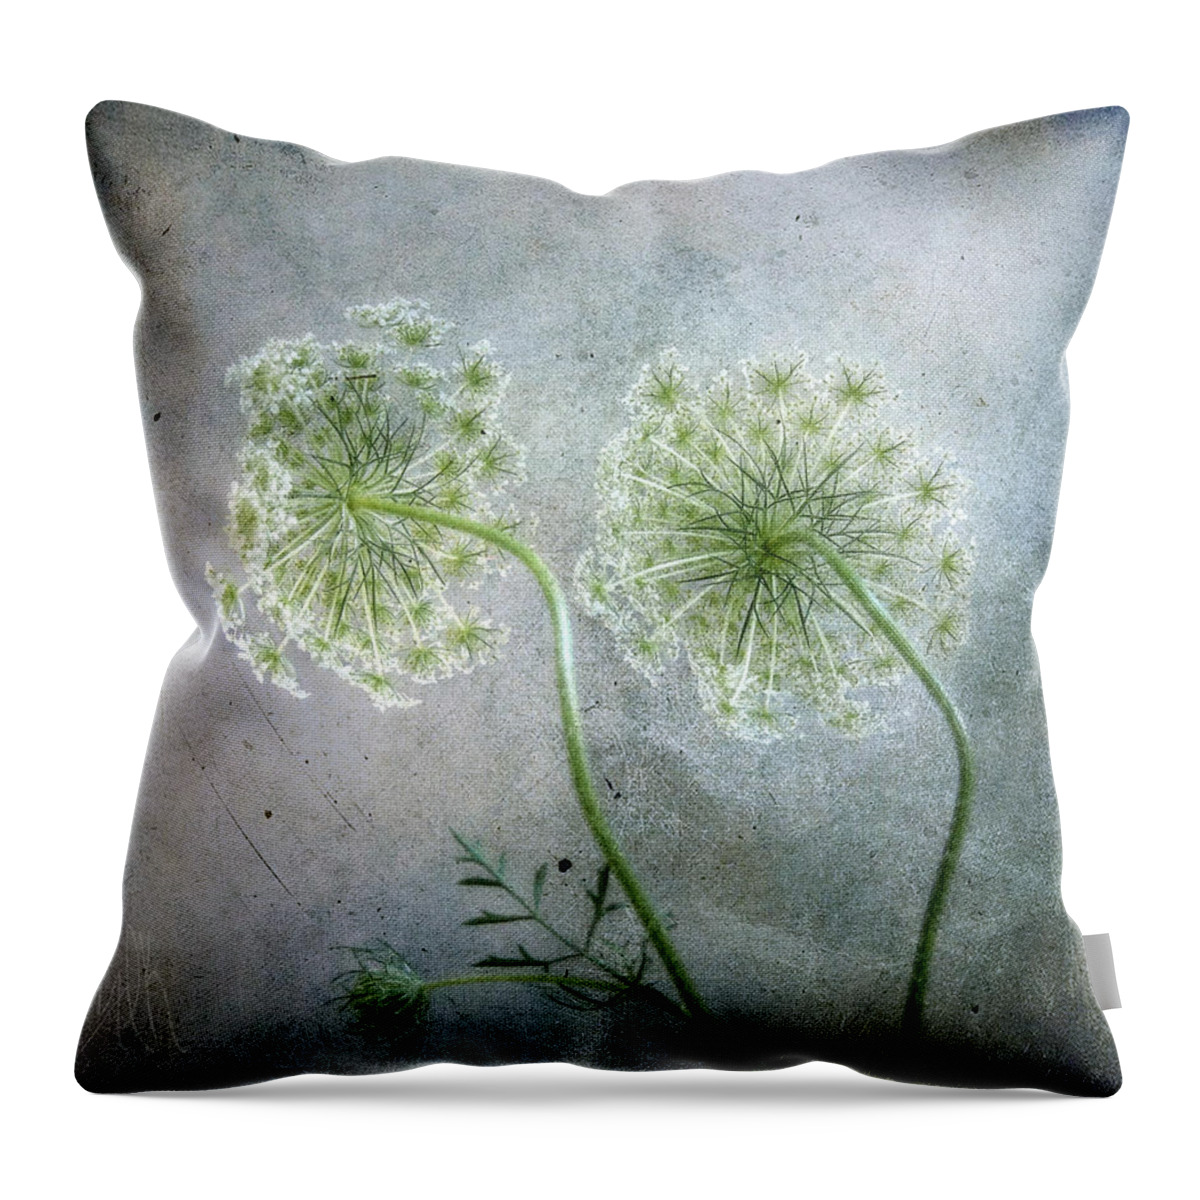 Queen Anne's Lace Throw Pillow featuring the photograph Lace Caps by Louise Kumpf